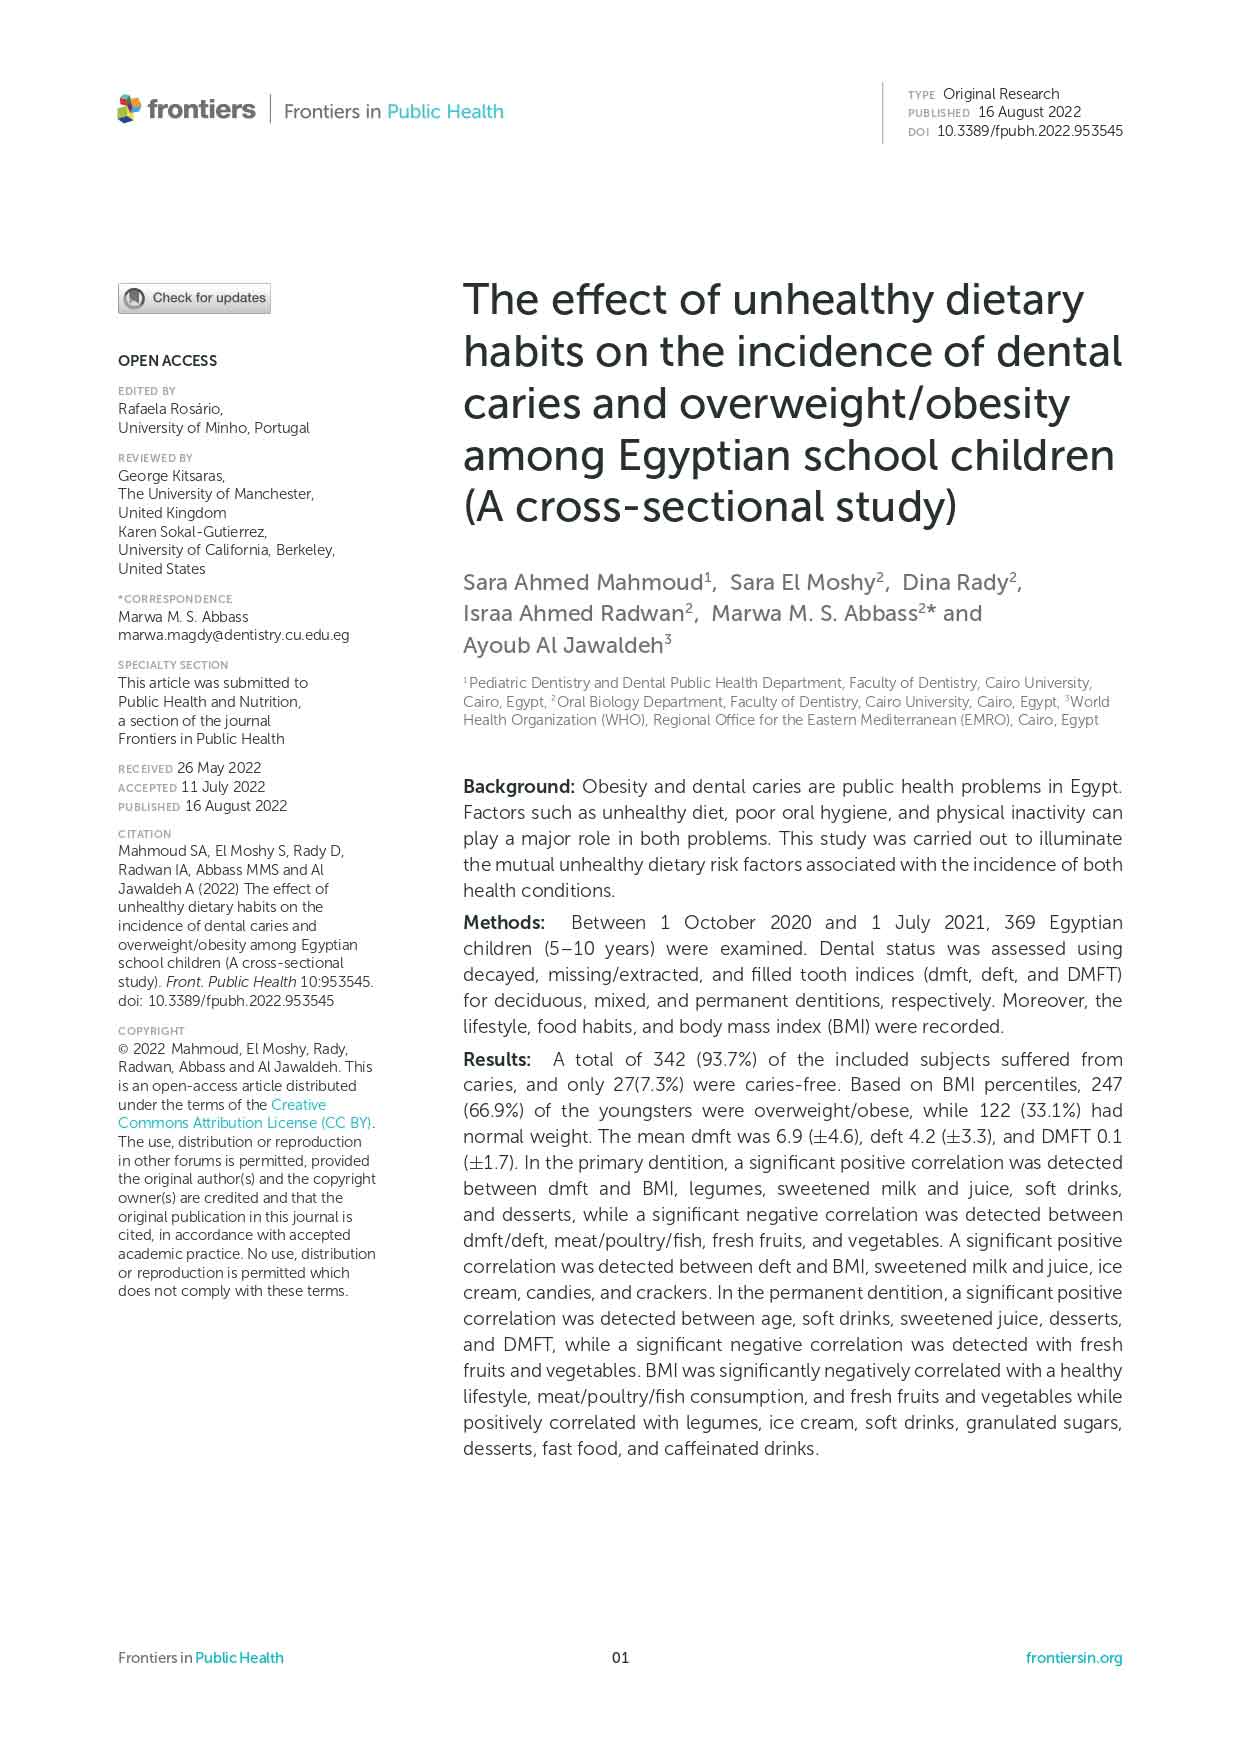 The effect of unhealthy dietary habits on the incidence of dental caries and overweight/obesity among Egyptian school children (a cross-sectional study)